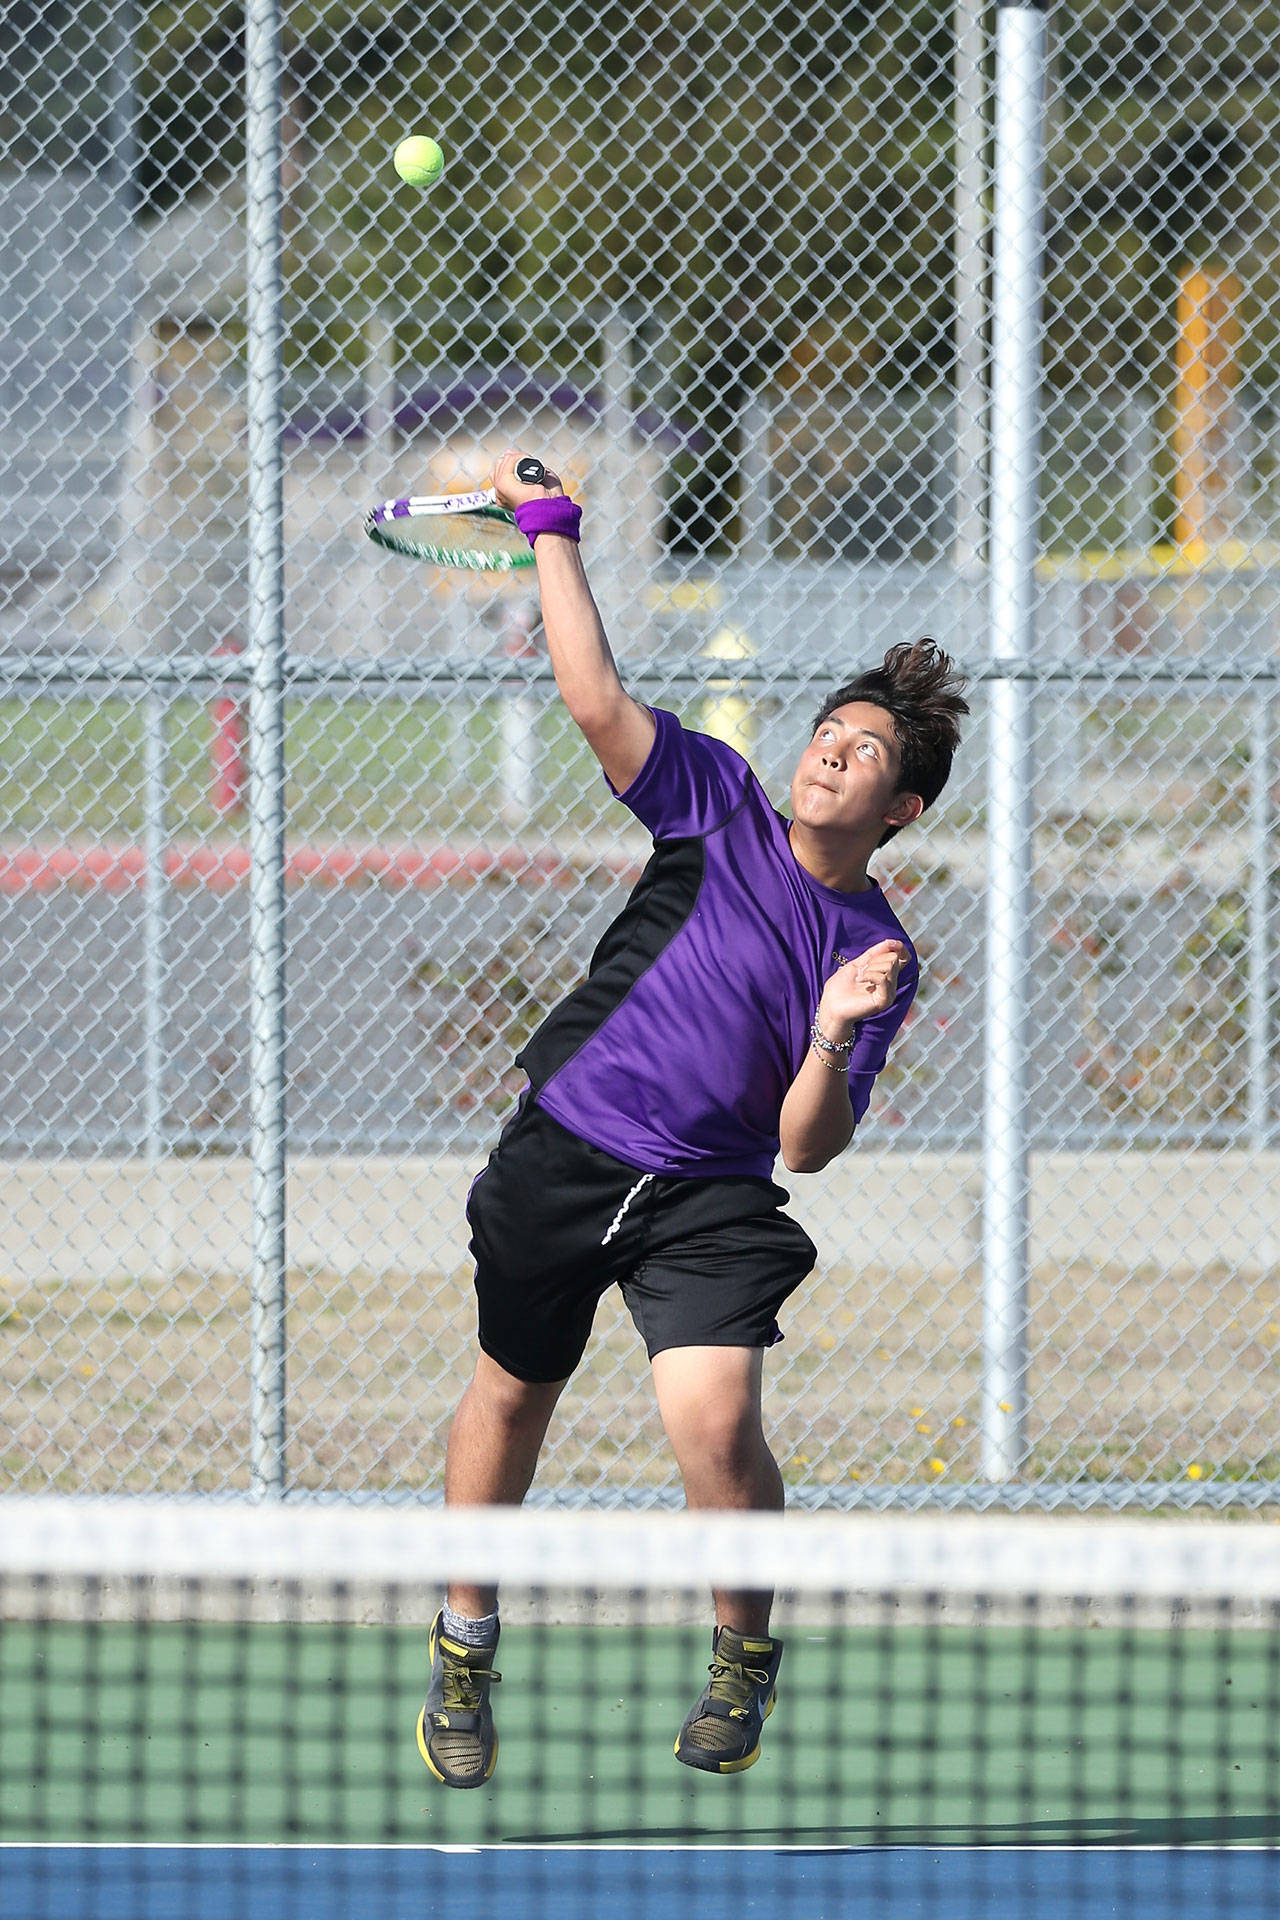 Elsian Atienza serves in Wednesday’s match with M-P. (Photo by John Fisken)